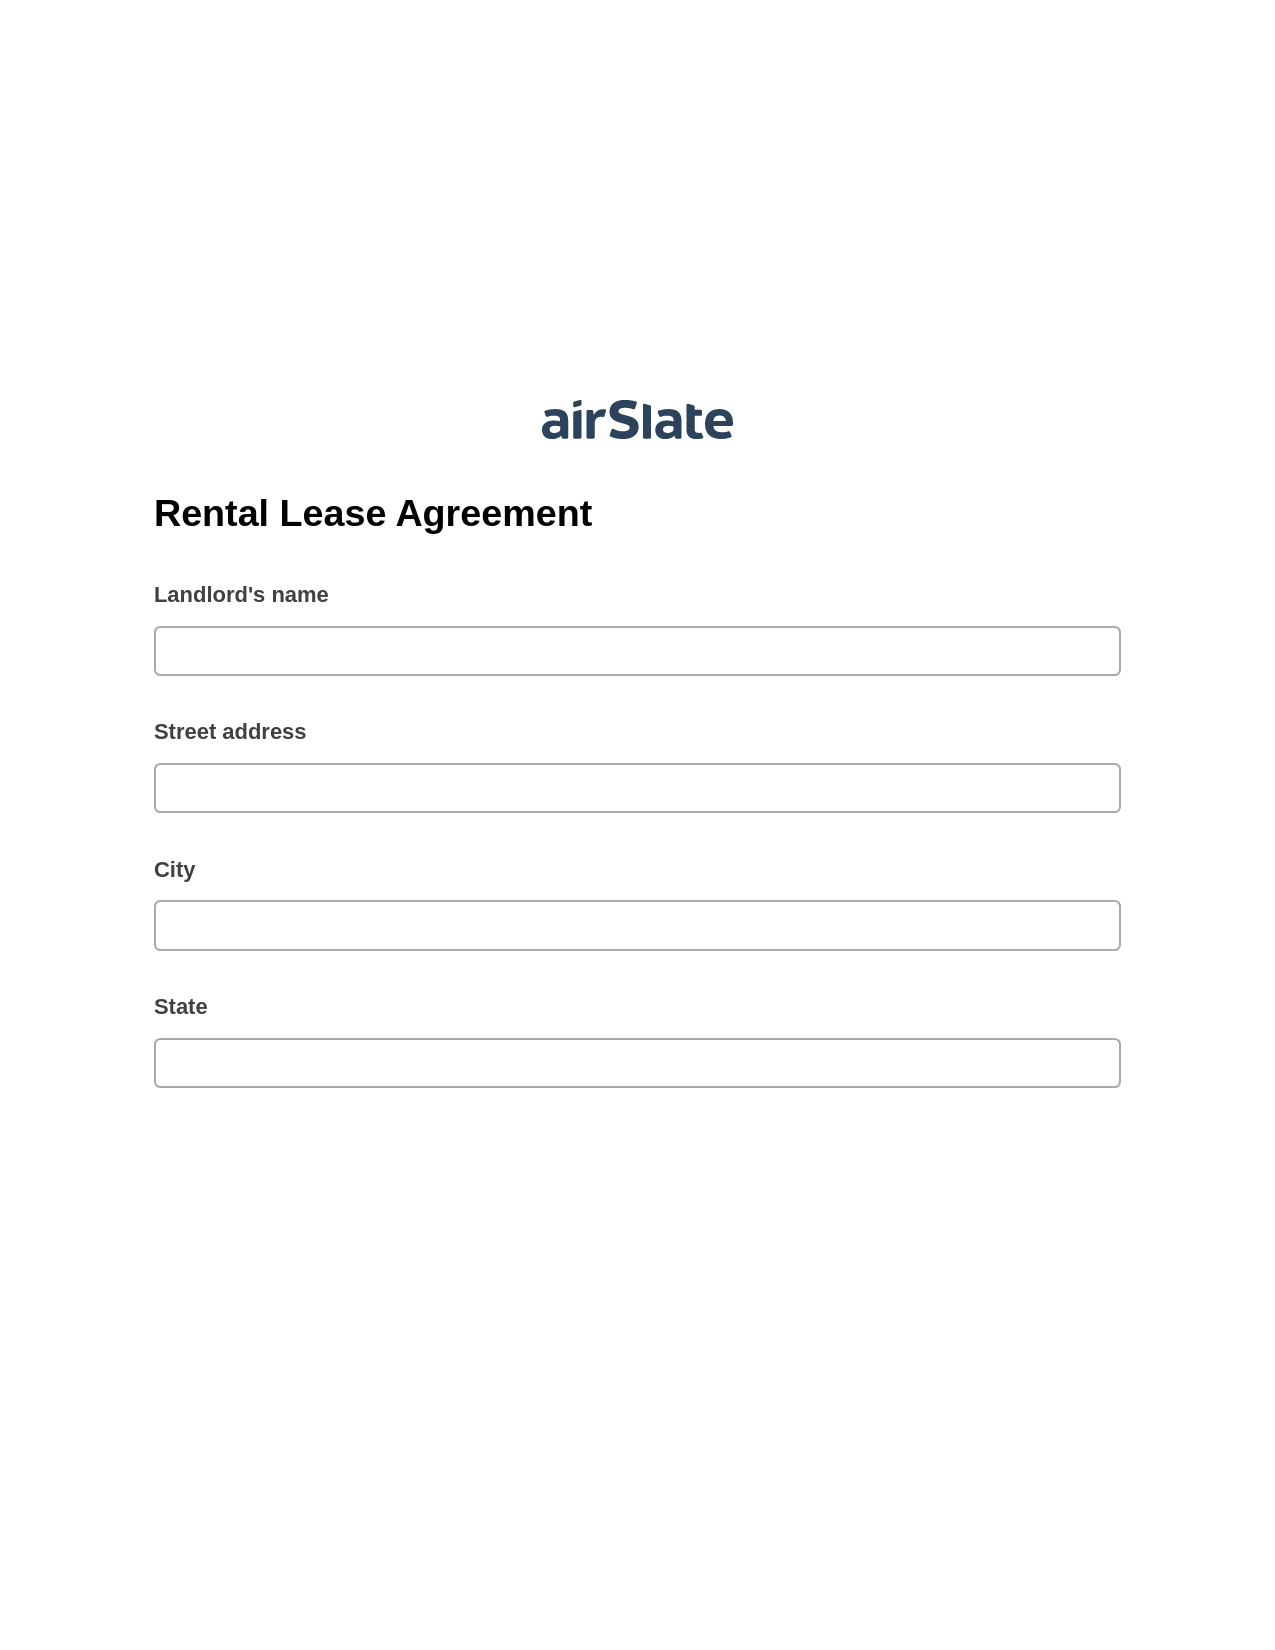 Rental Lease Agreement Pre-fill from Google Sheets Bot, Invoke Salesforce Process Bot, Export to NetSuite Record Bot